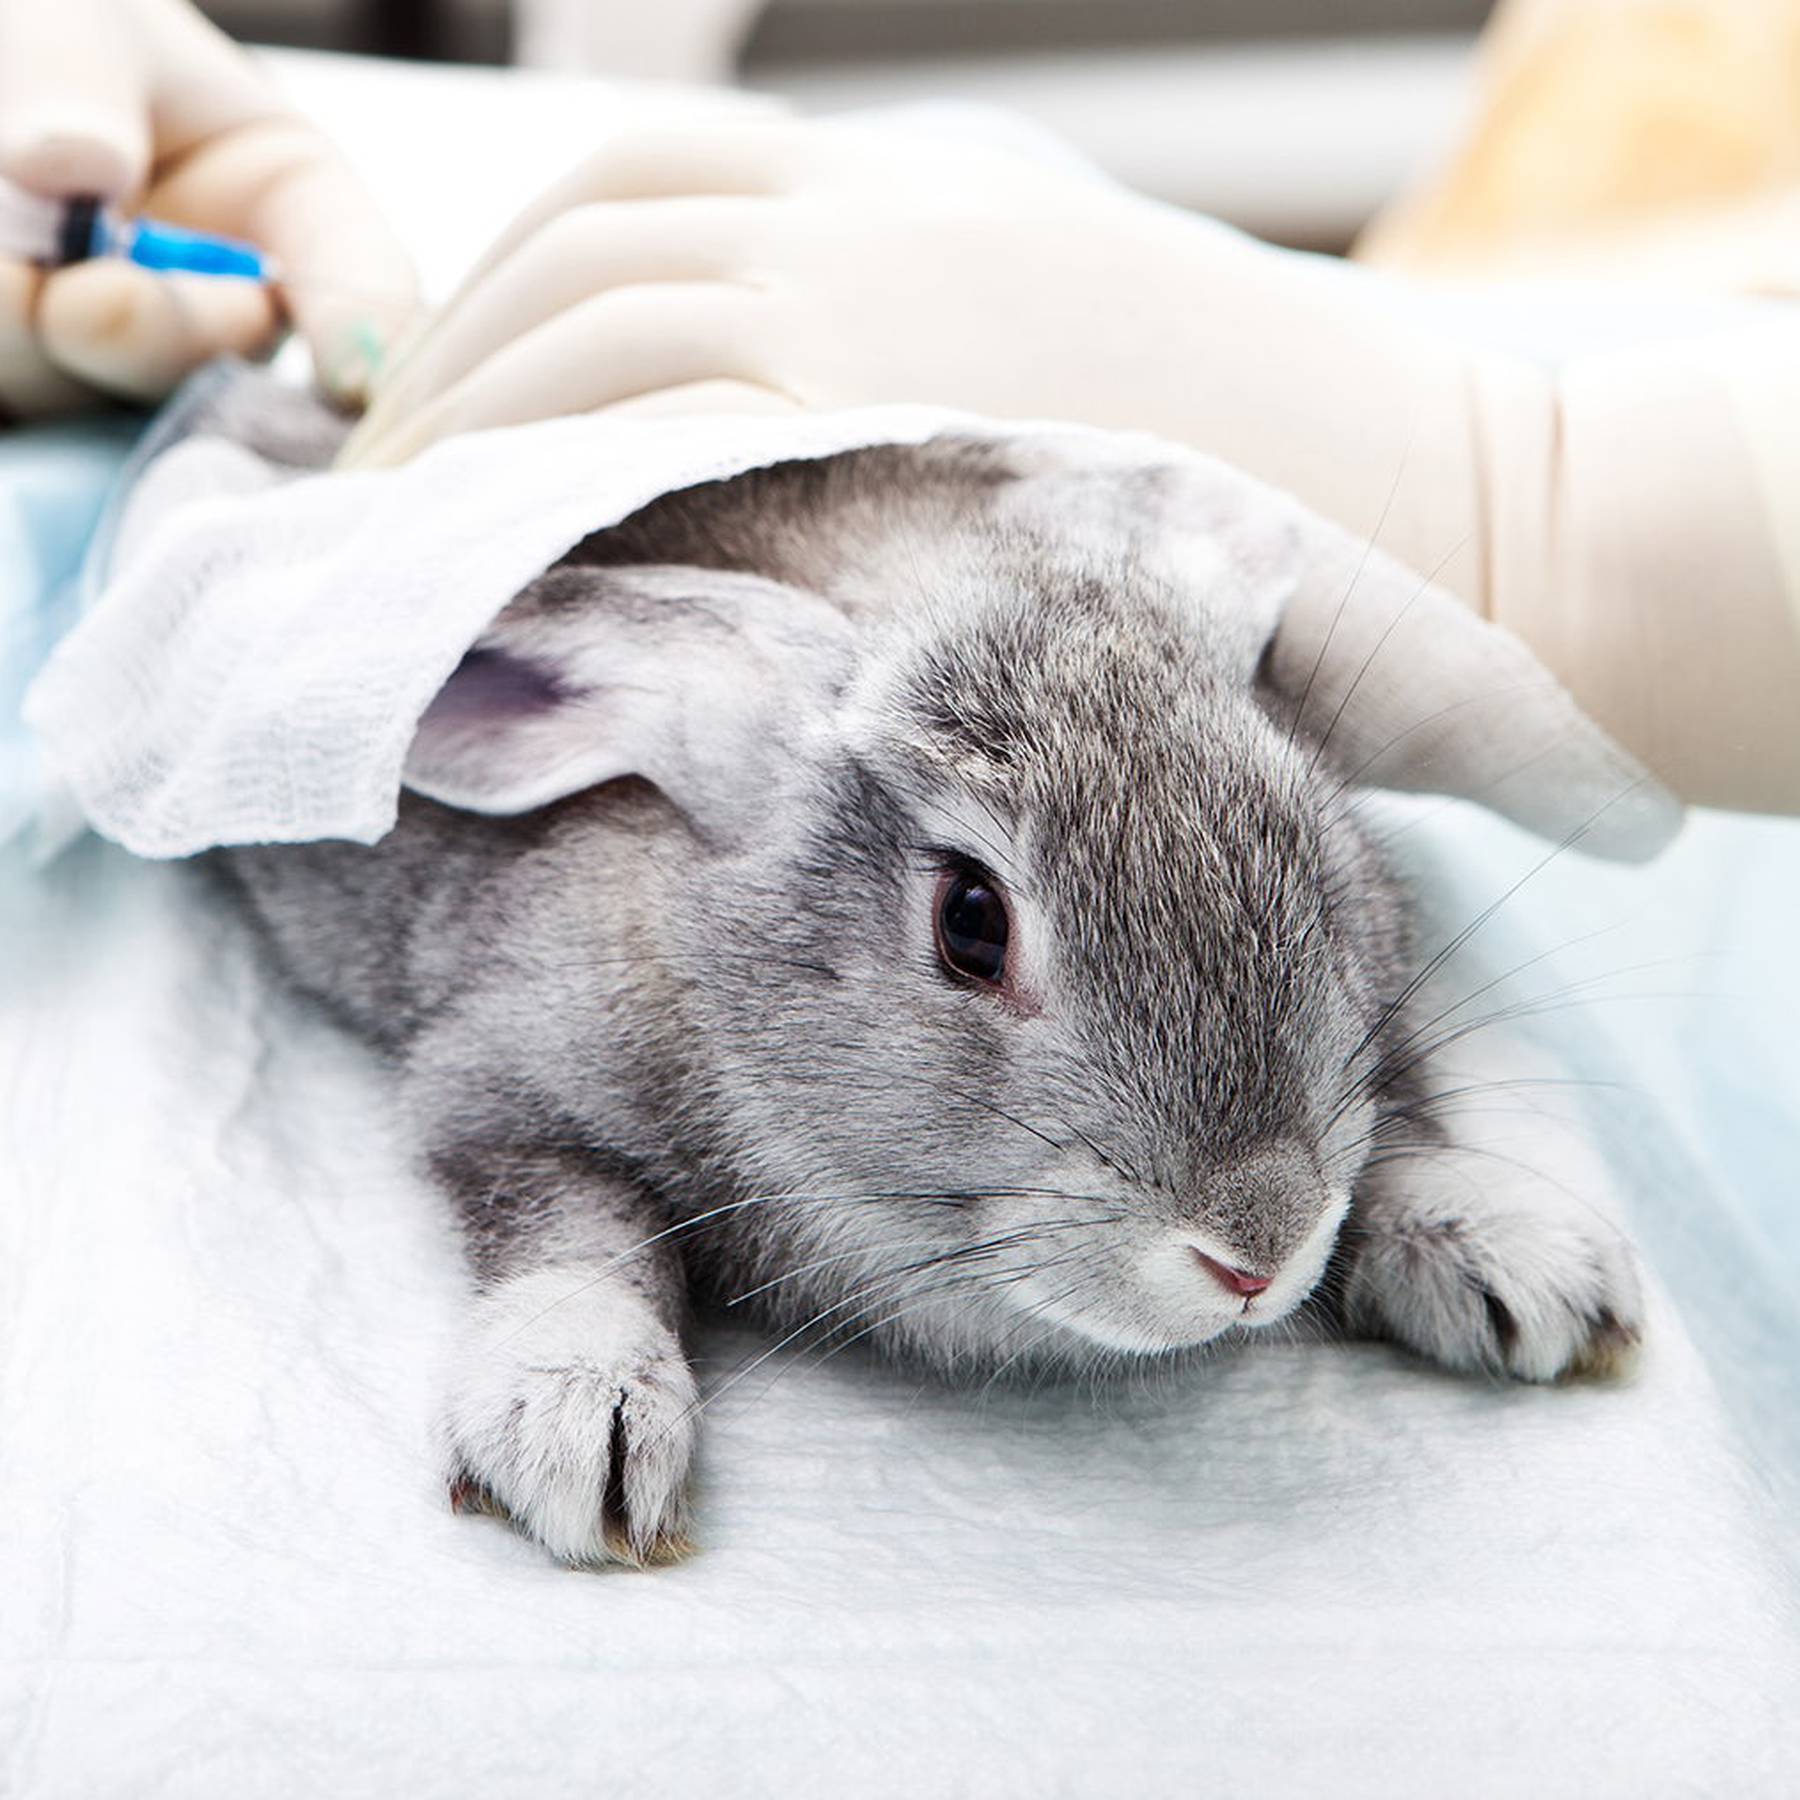 Is the Global Cosmetics Market Moving Towards a Cruelty-Free Future? | BoF